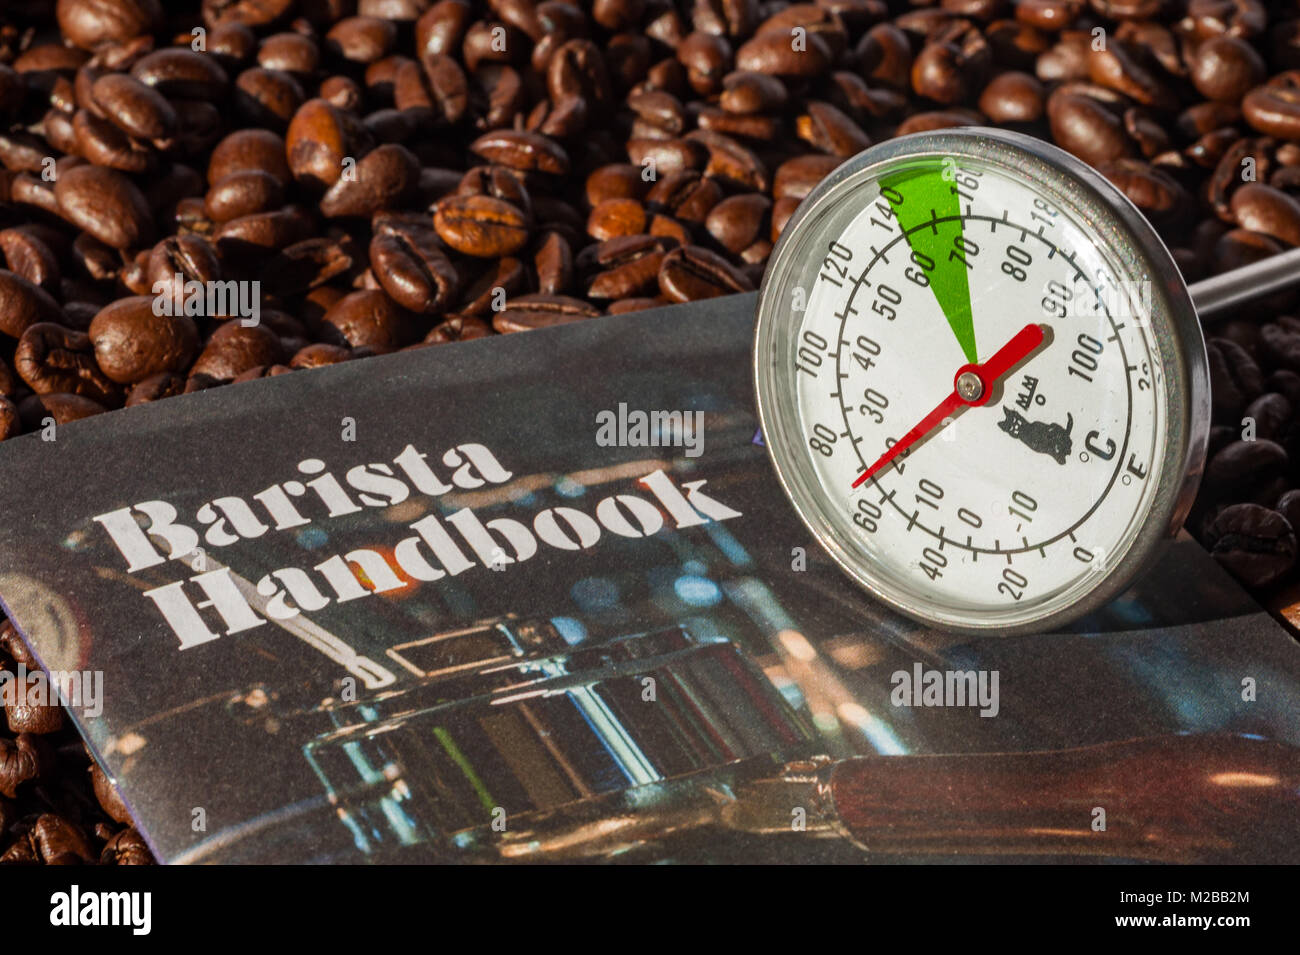 Checking Milk Temperature For Making Coffee Stock Photo - Download Image  Now - Thermometer, Celsius, Fahrenheit - iStock